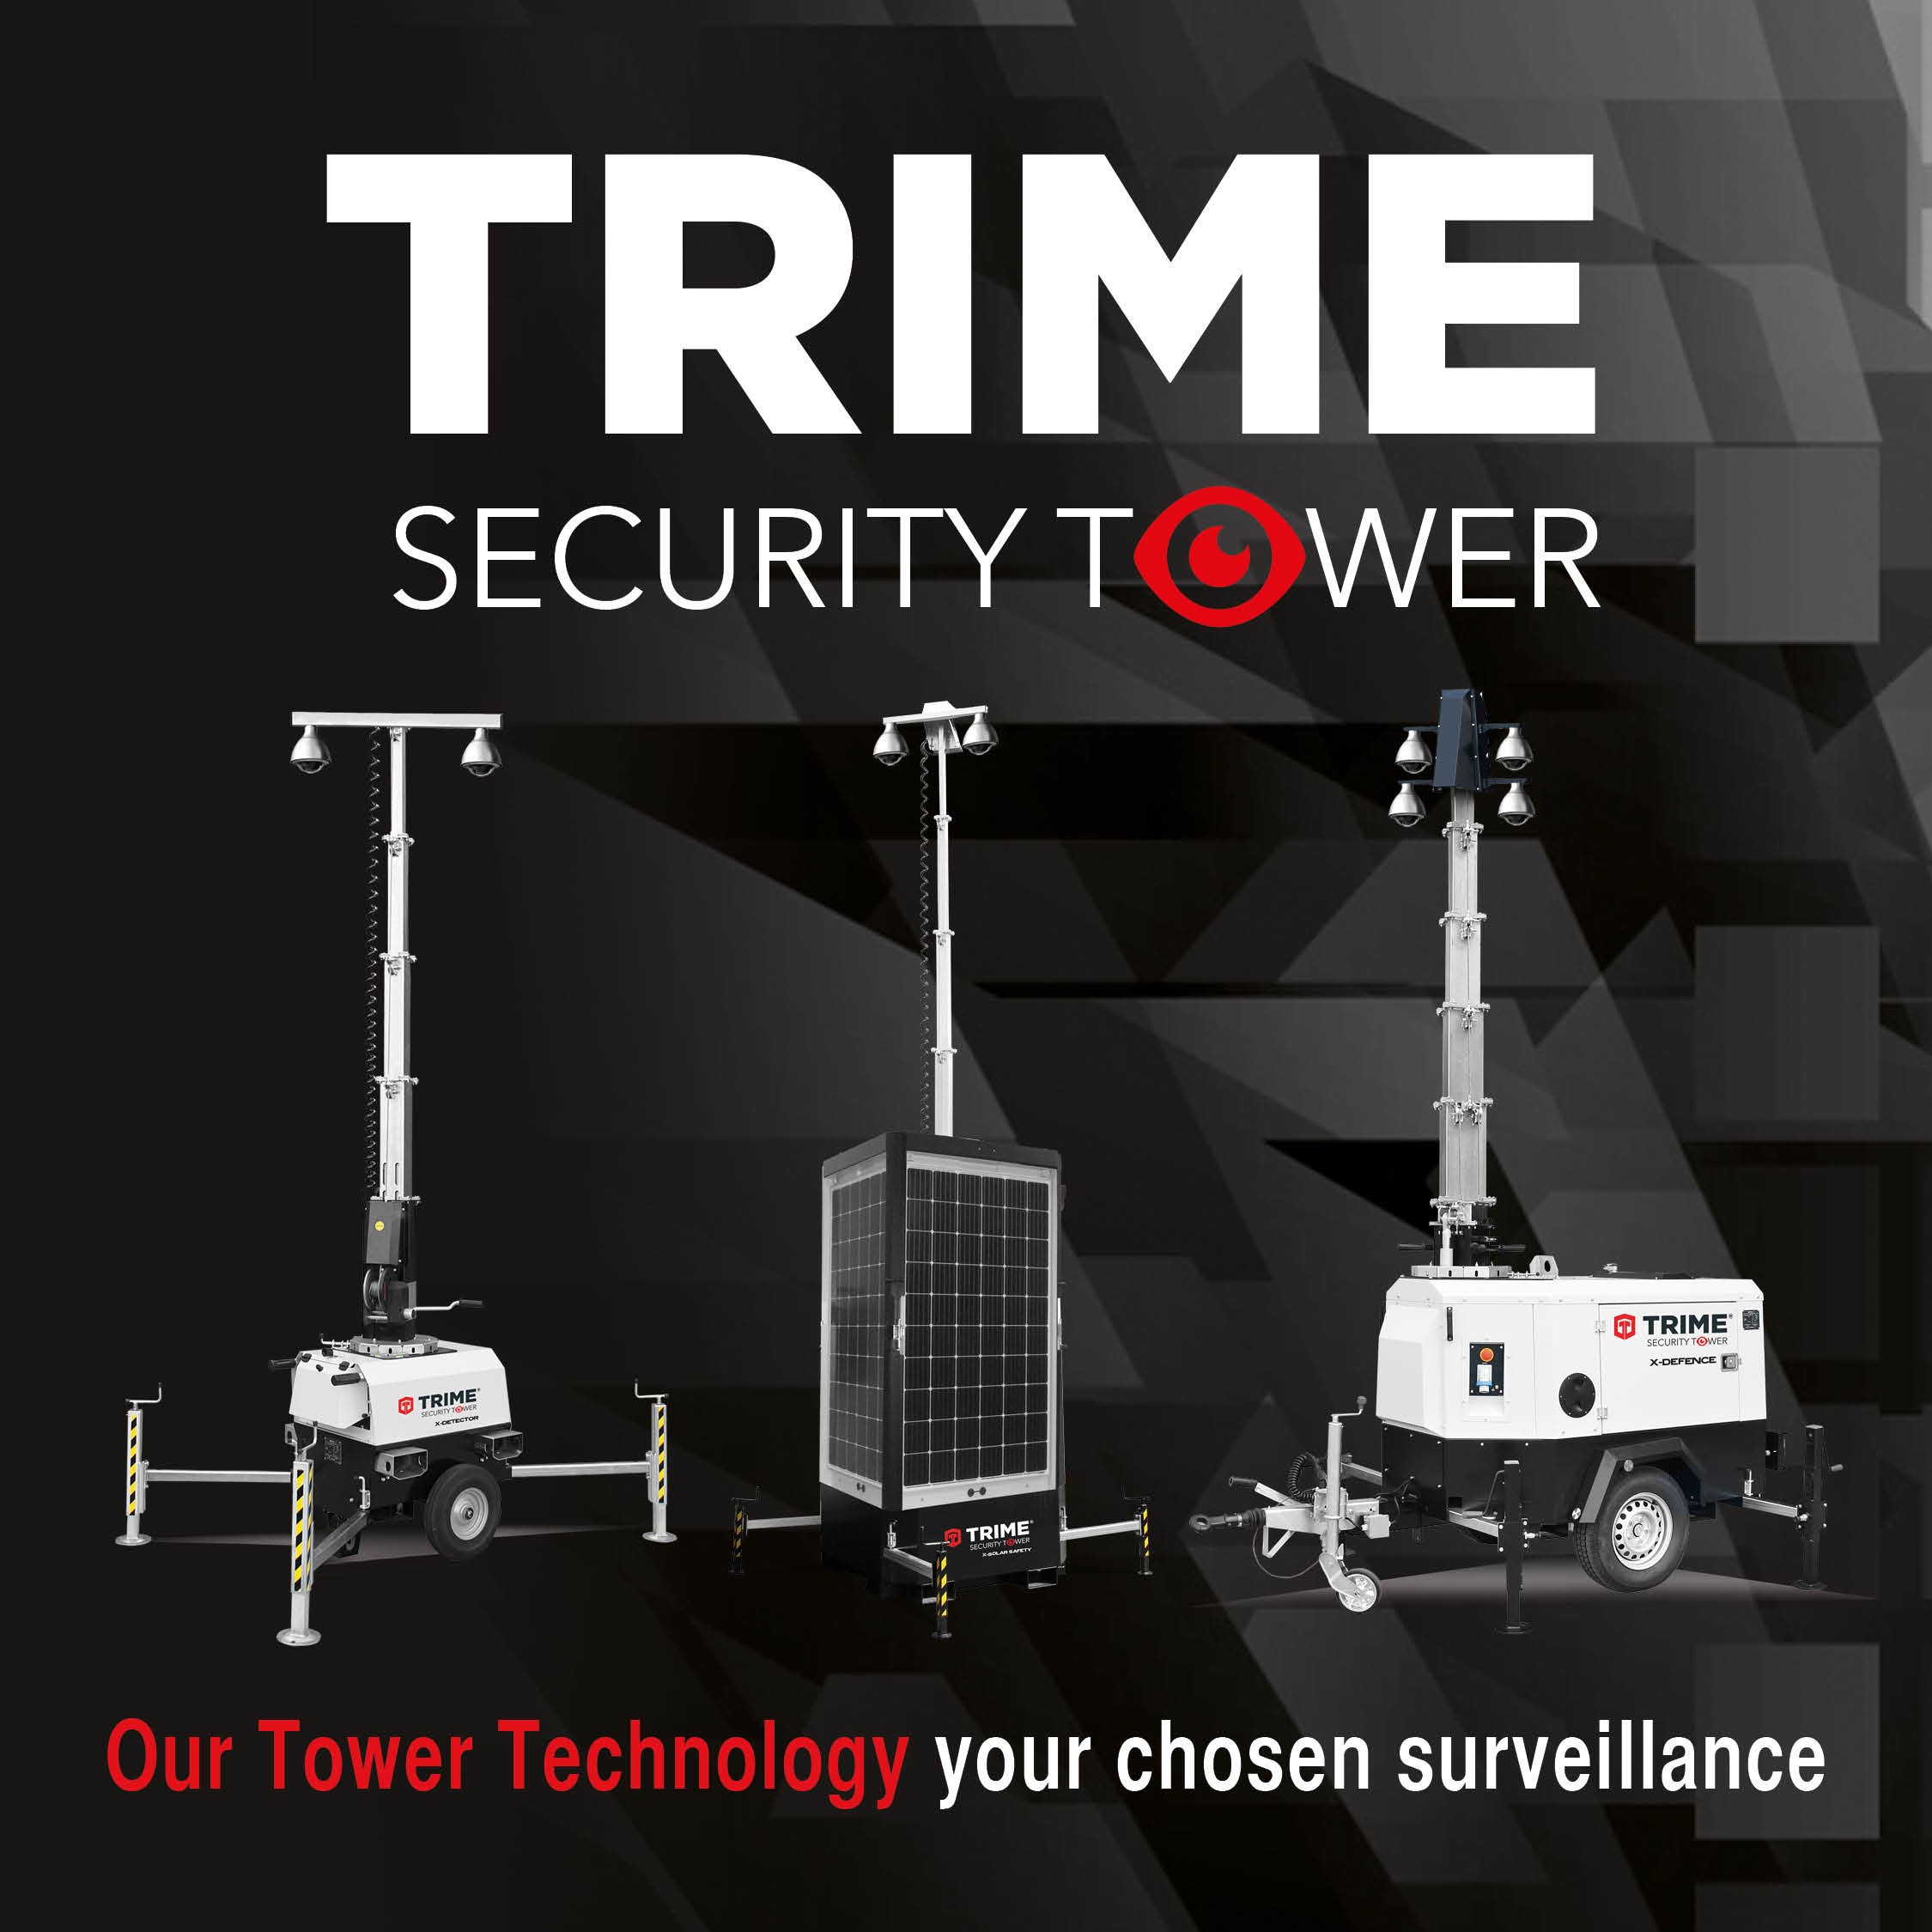 We launch a brand new range of security towers